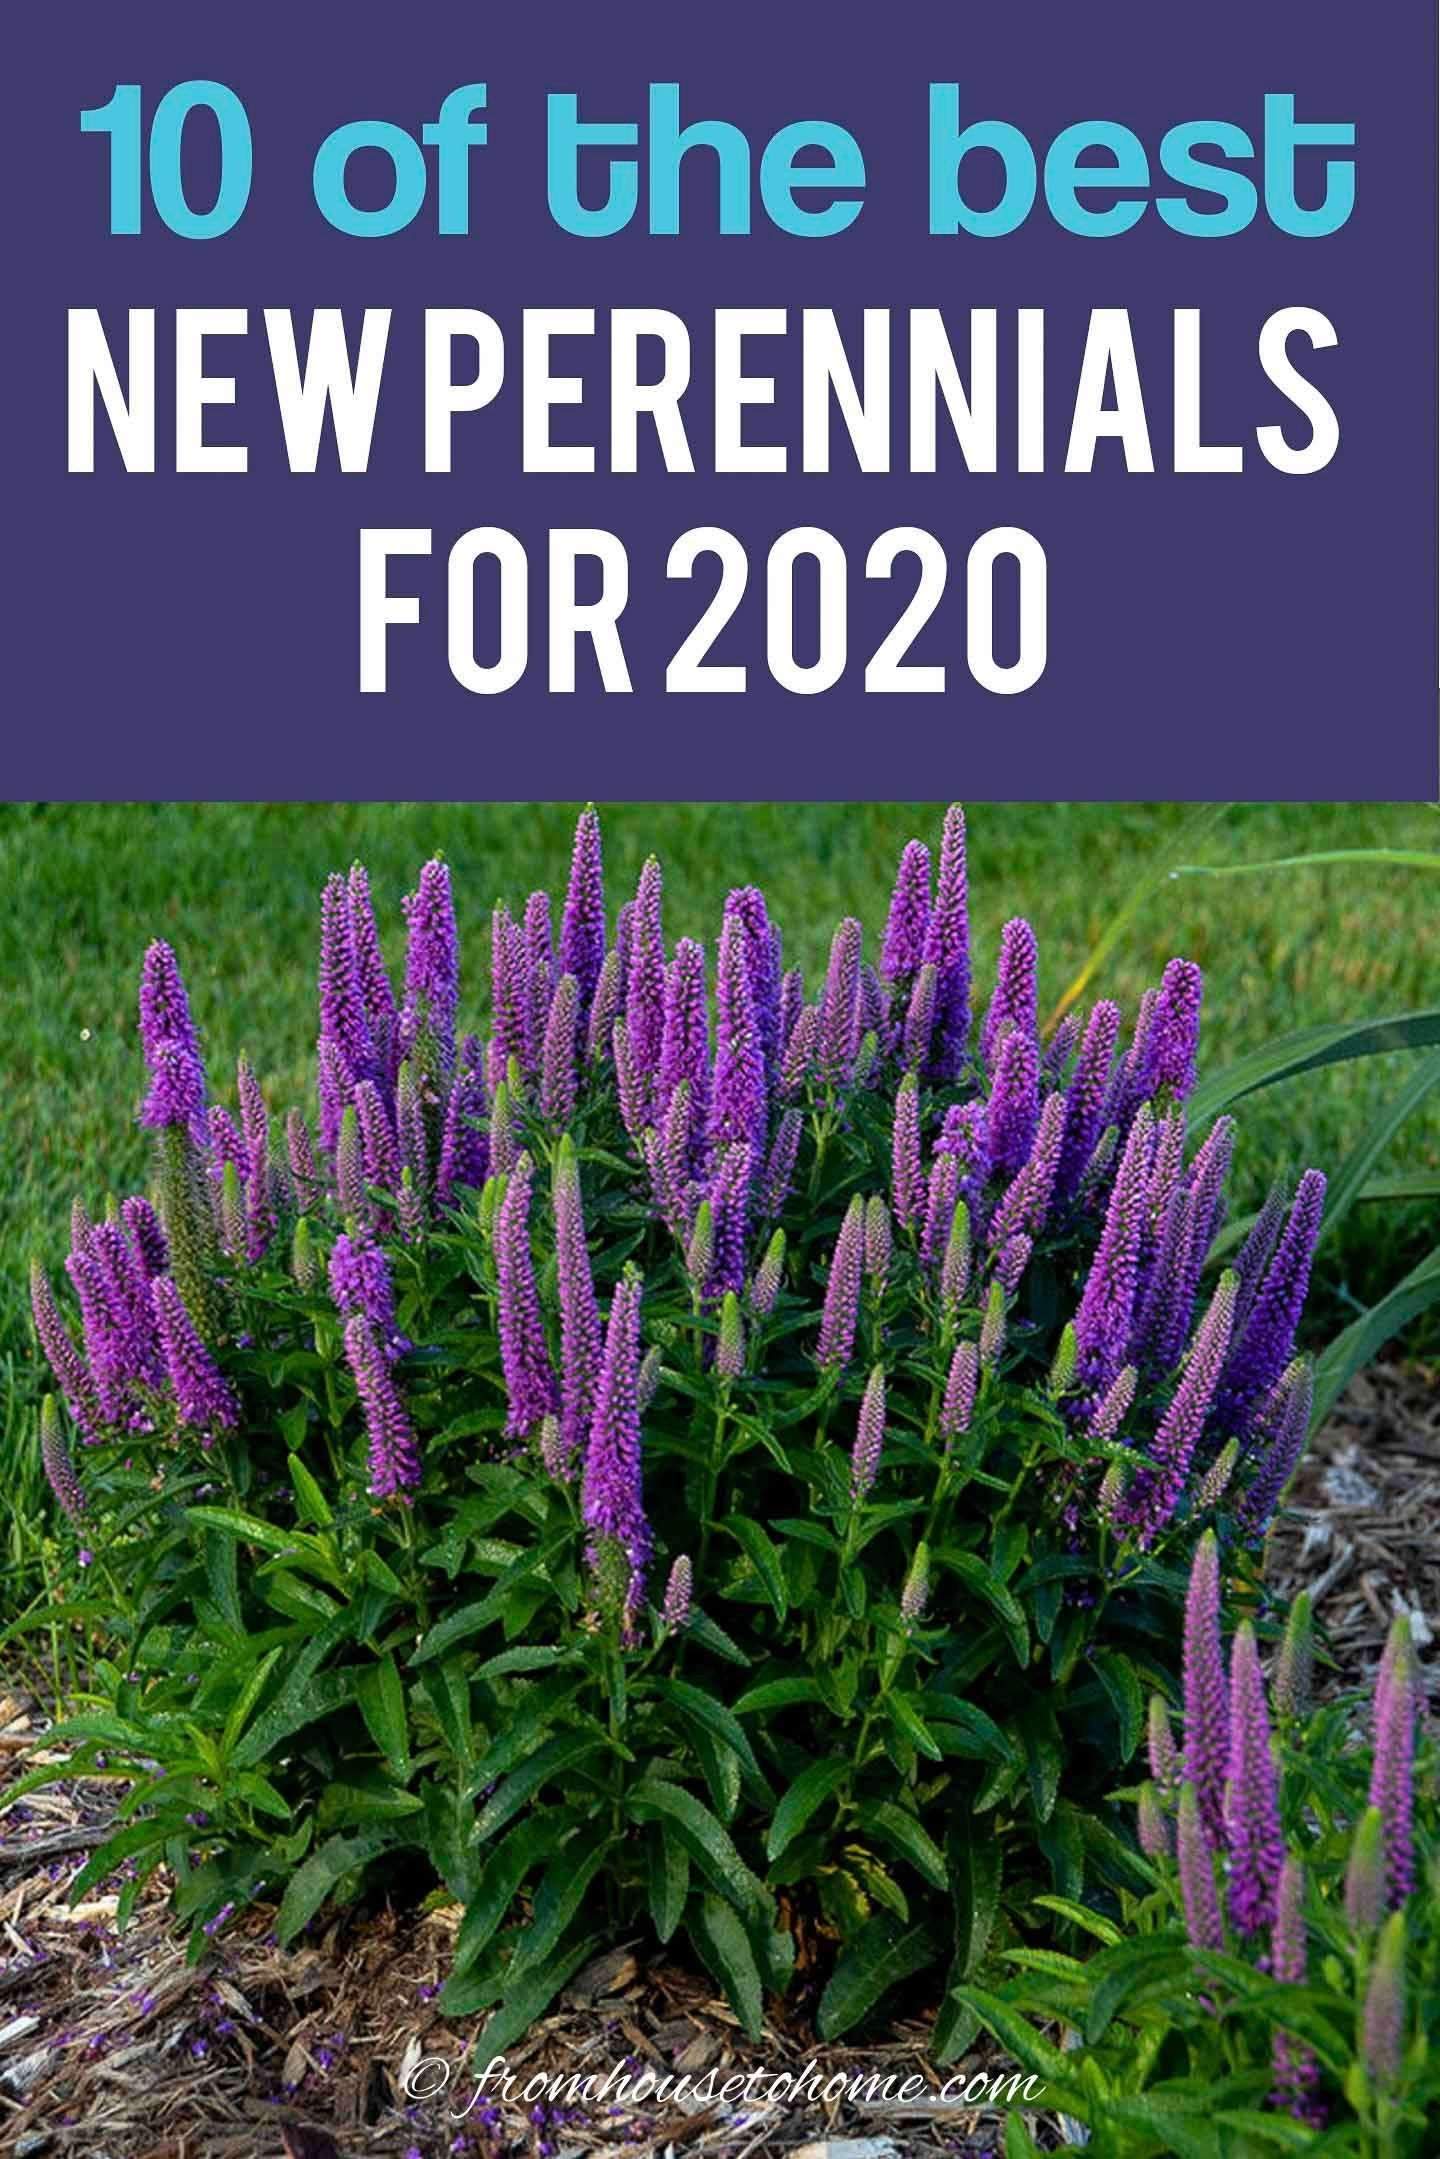 I love this list of the best new perennials for 2020. So many beautiful,…